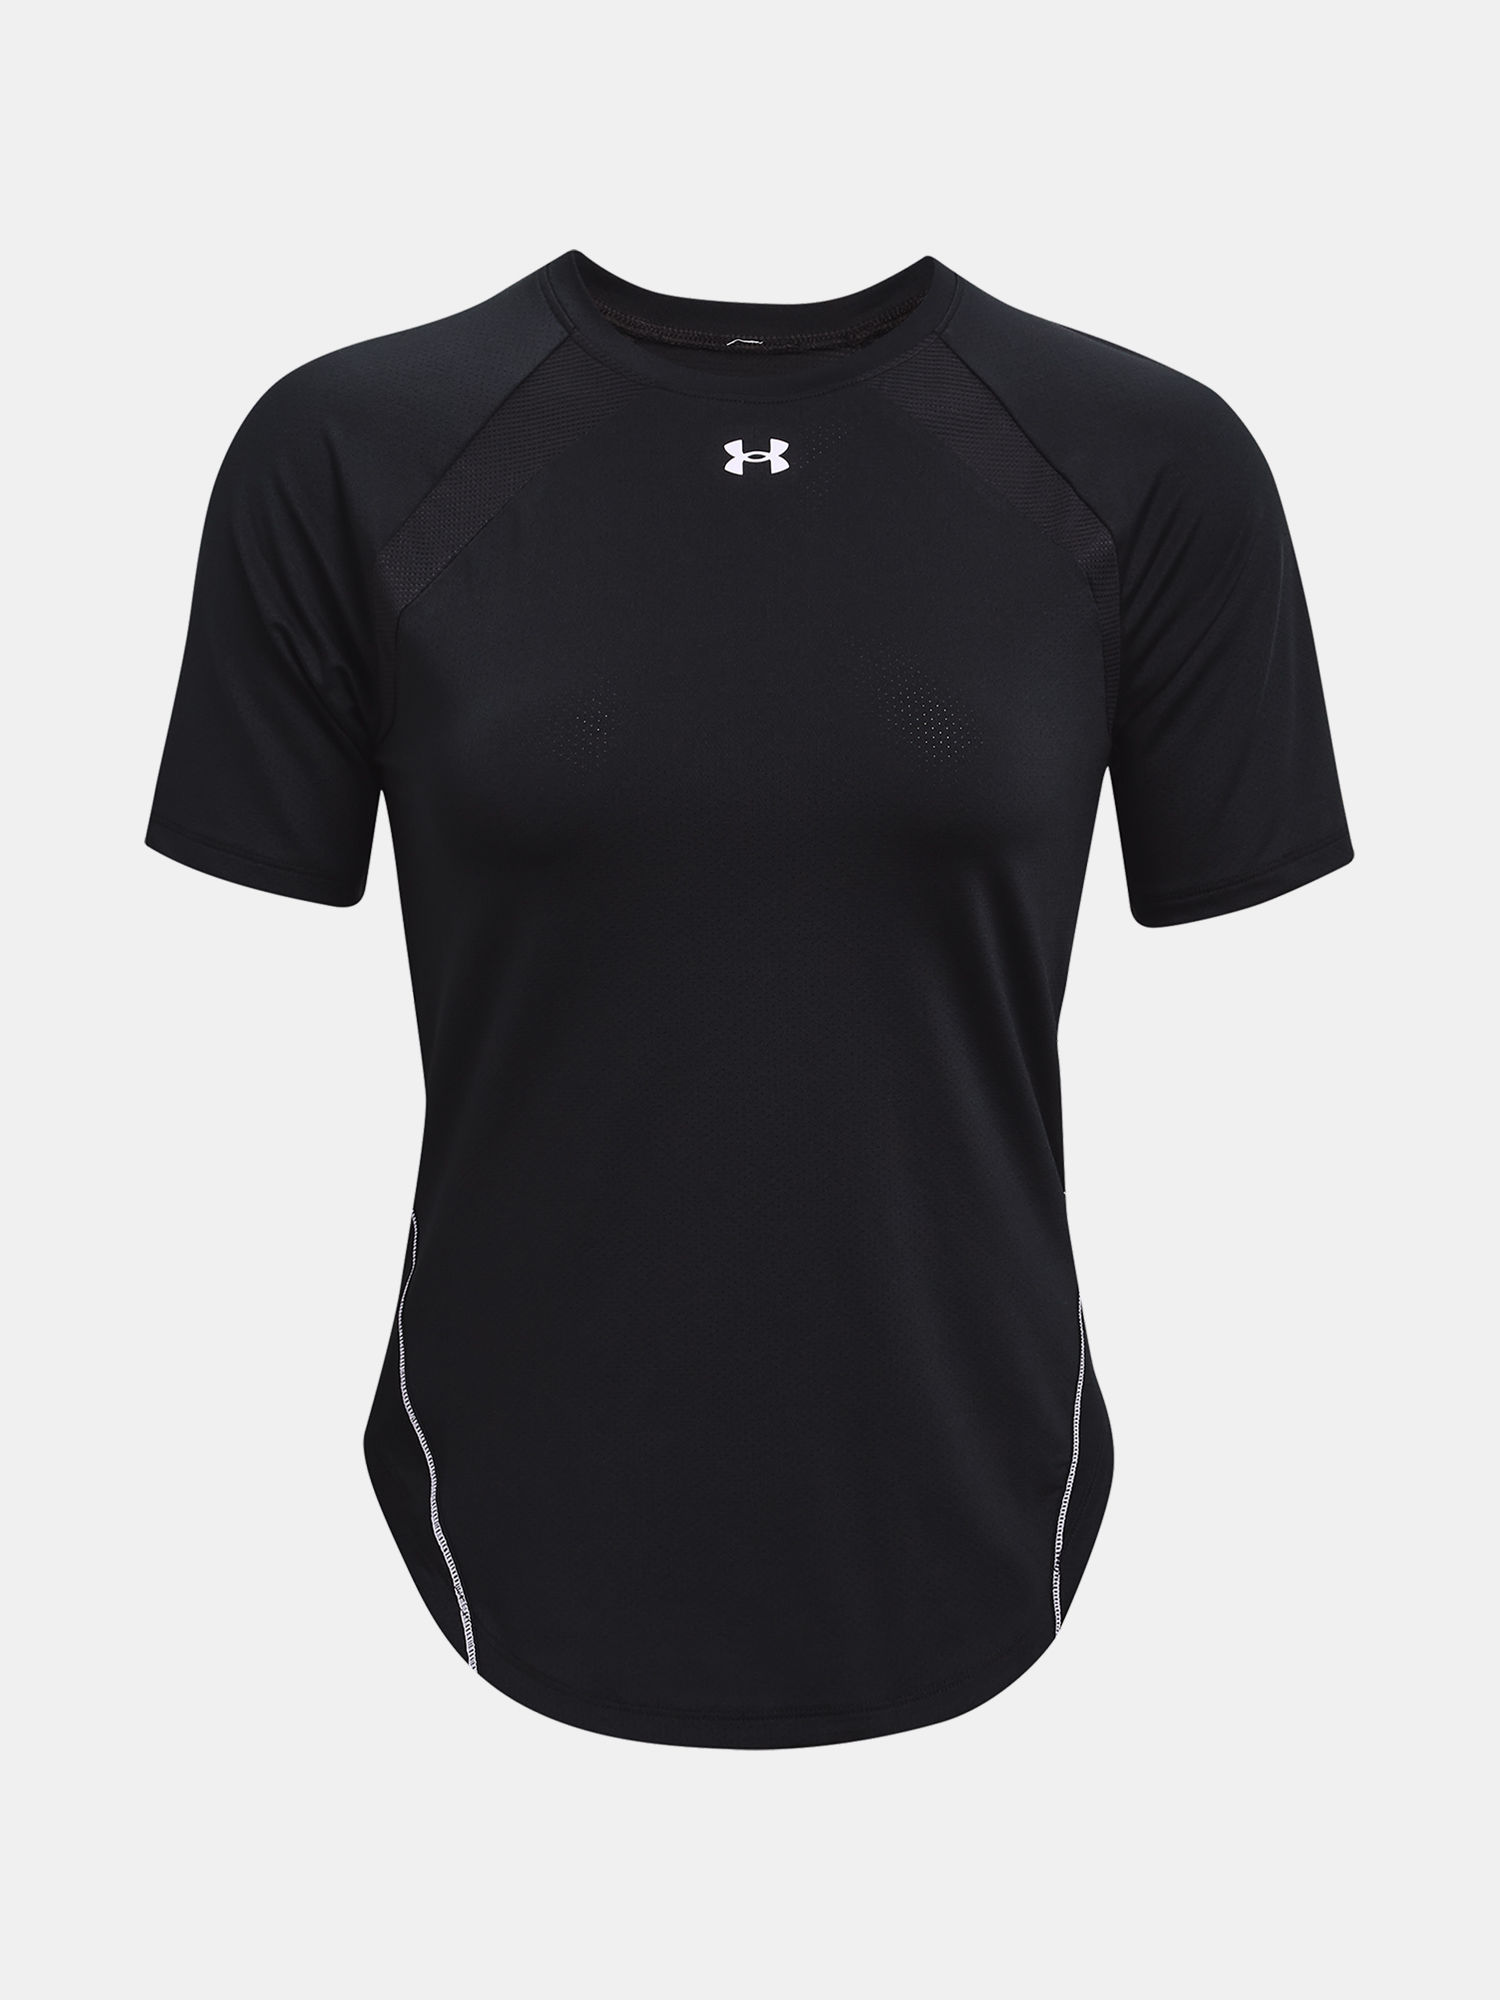 Tričko Under Armour Coolswitch SS-BLK (3)